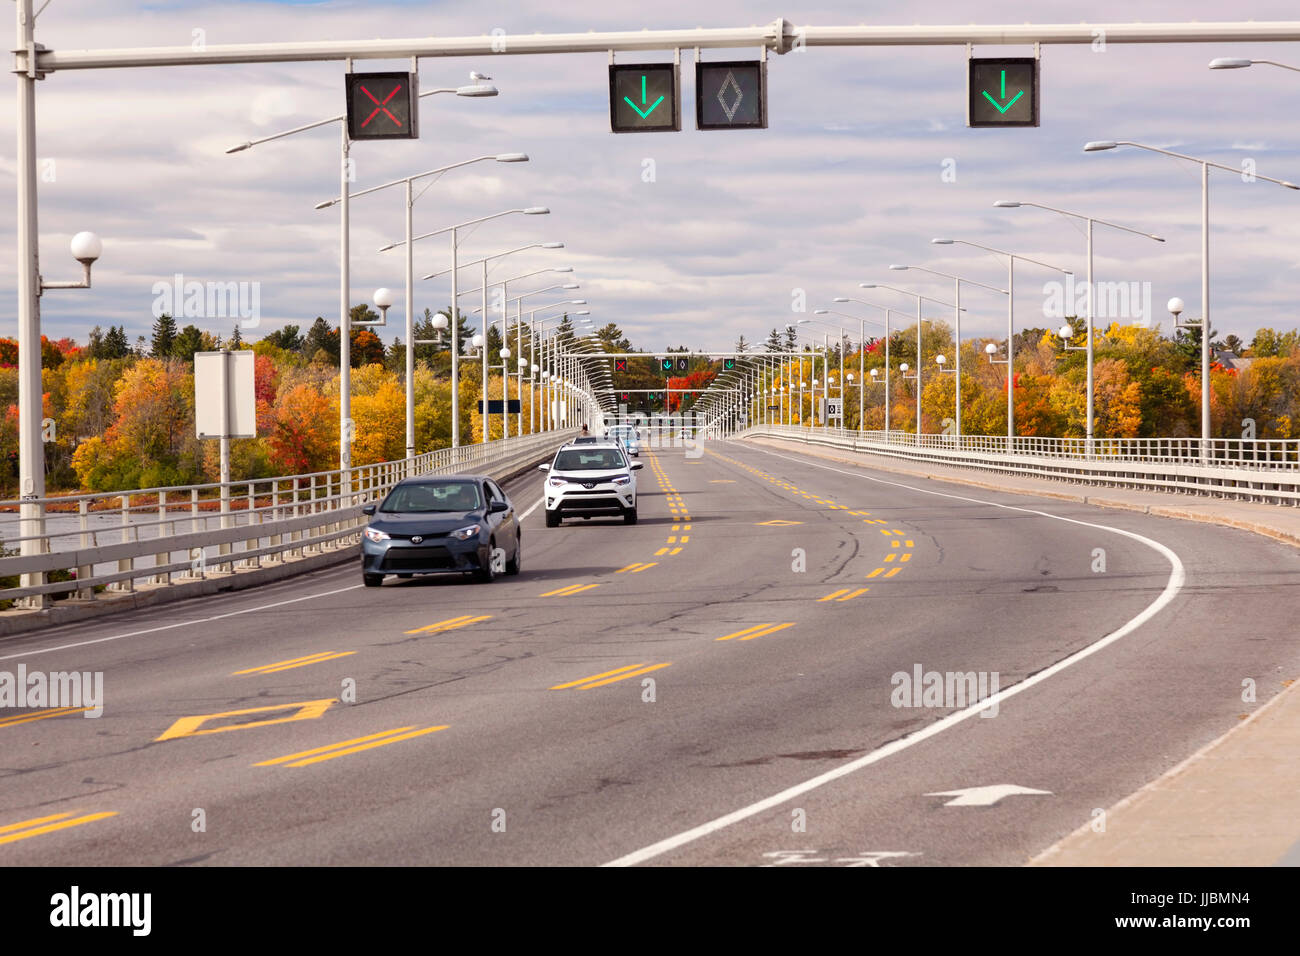 A reversible lane and illuminated signs showing traffic flow along the Champlain Bridge that crosses the Ottawa River from Ottawa to Gatineau. Stock Photo